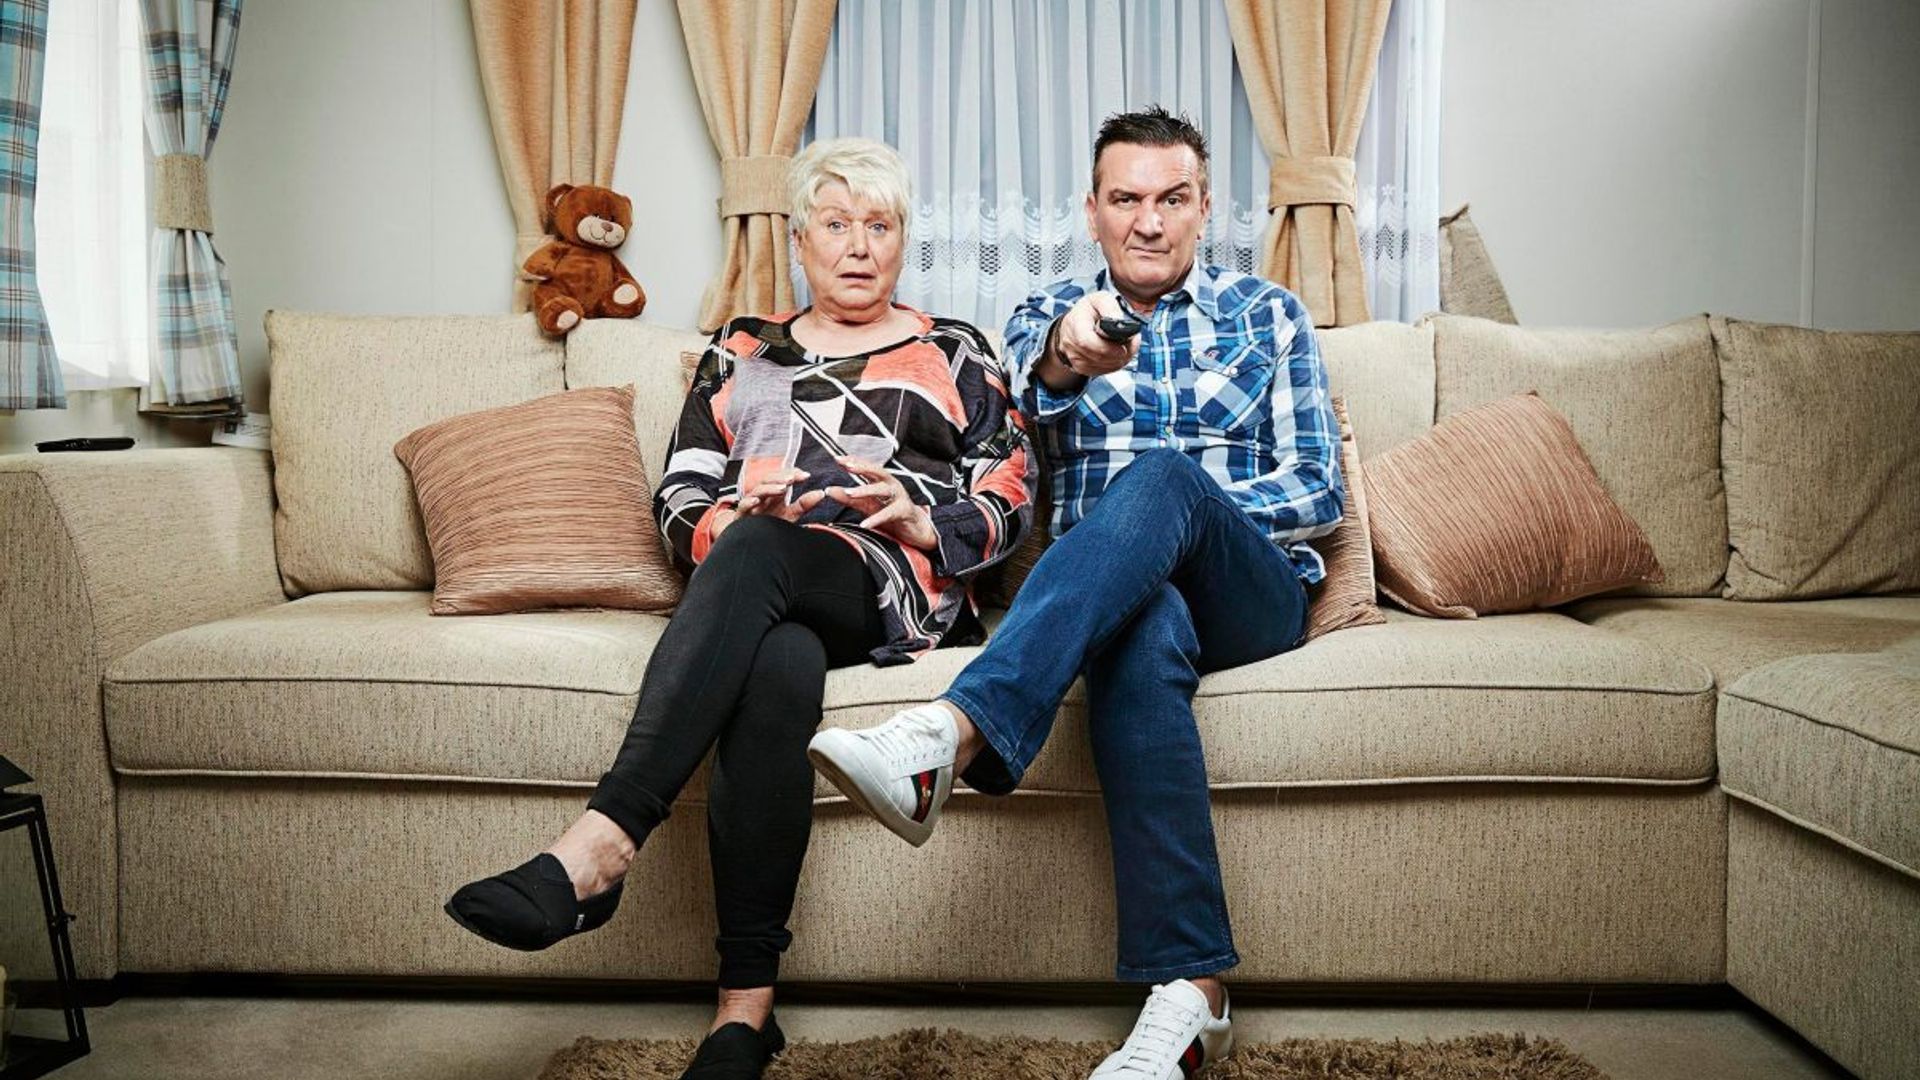 Gogglebox leaves viewers in tears over emotional Christmas special moment